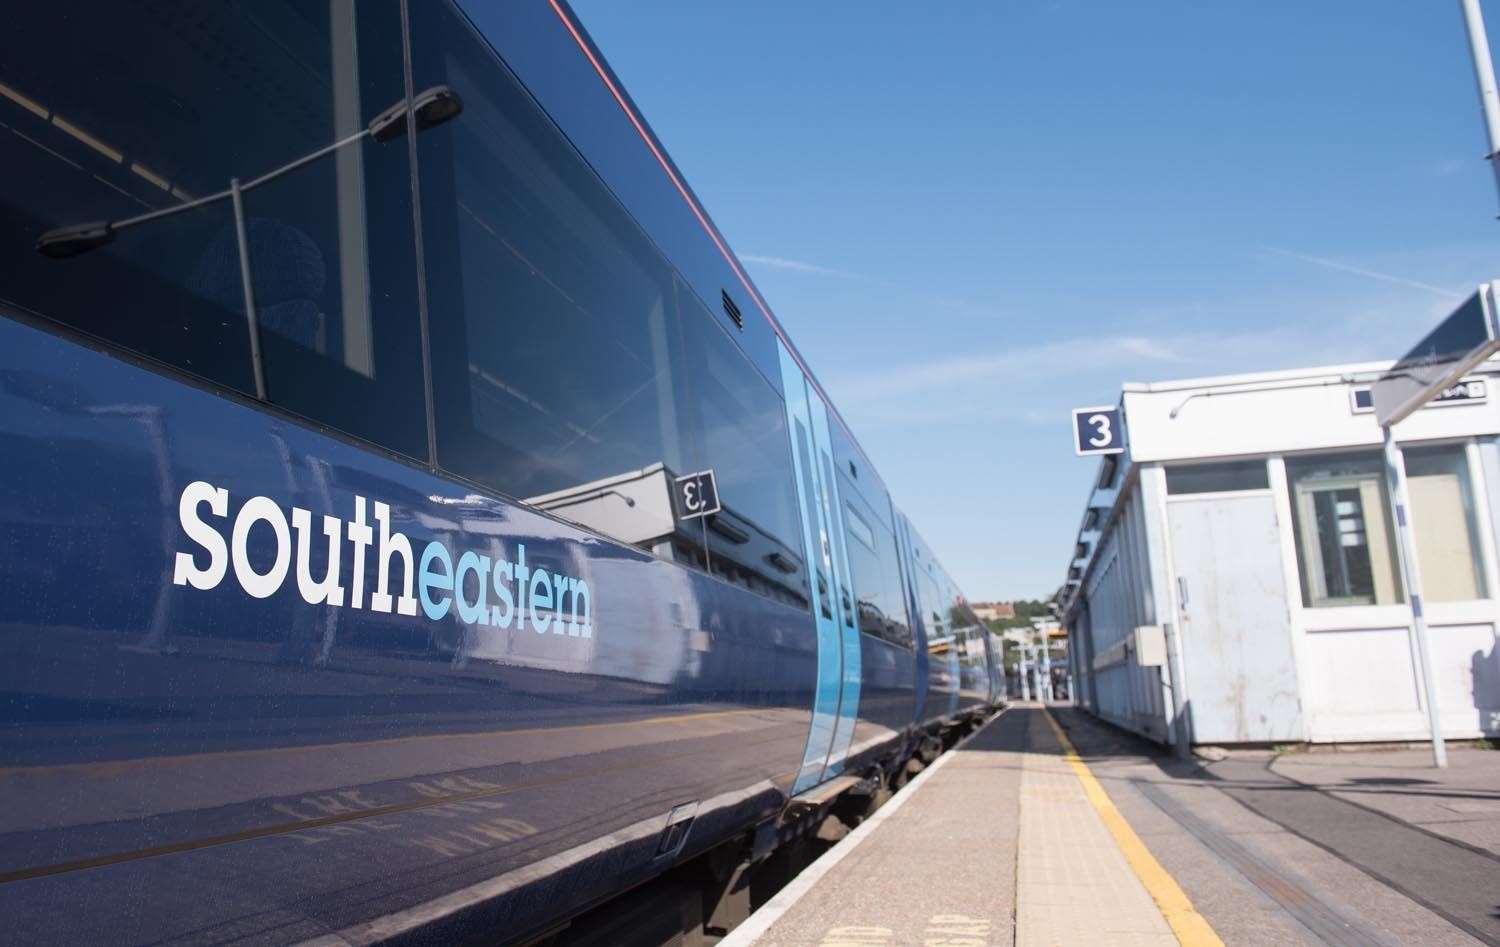 Southeastern has warned of slower speeds on Monday and Tuesday